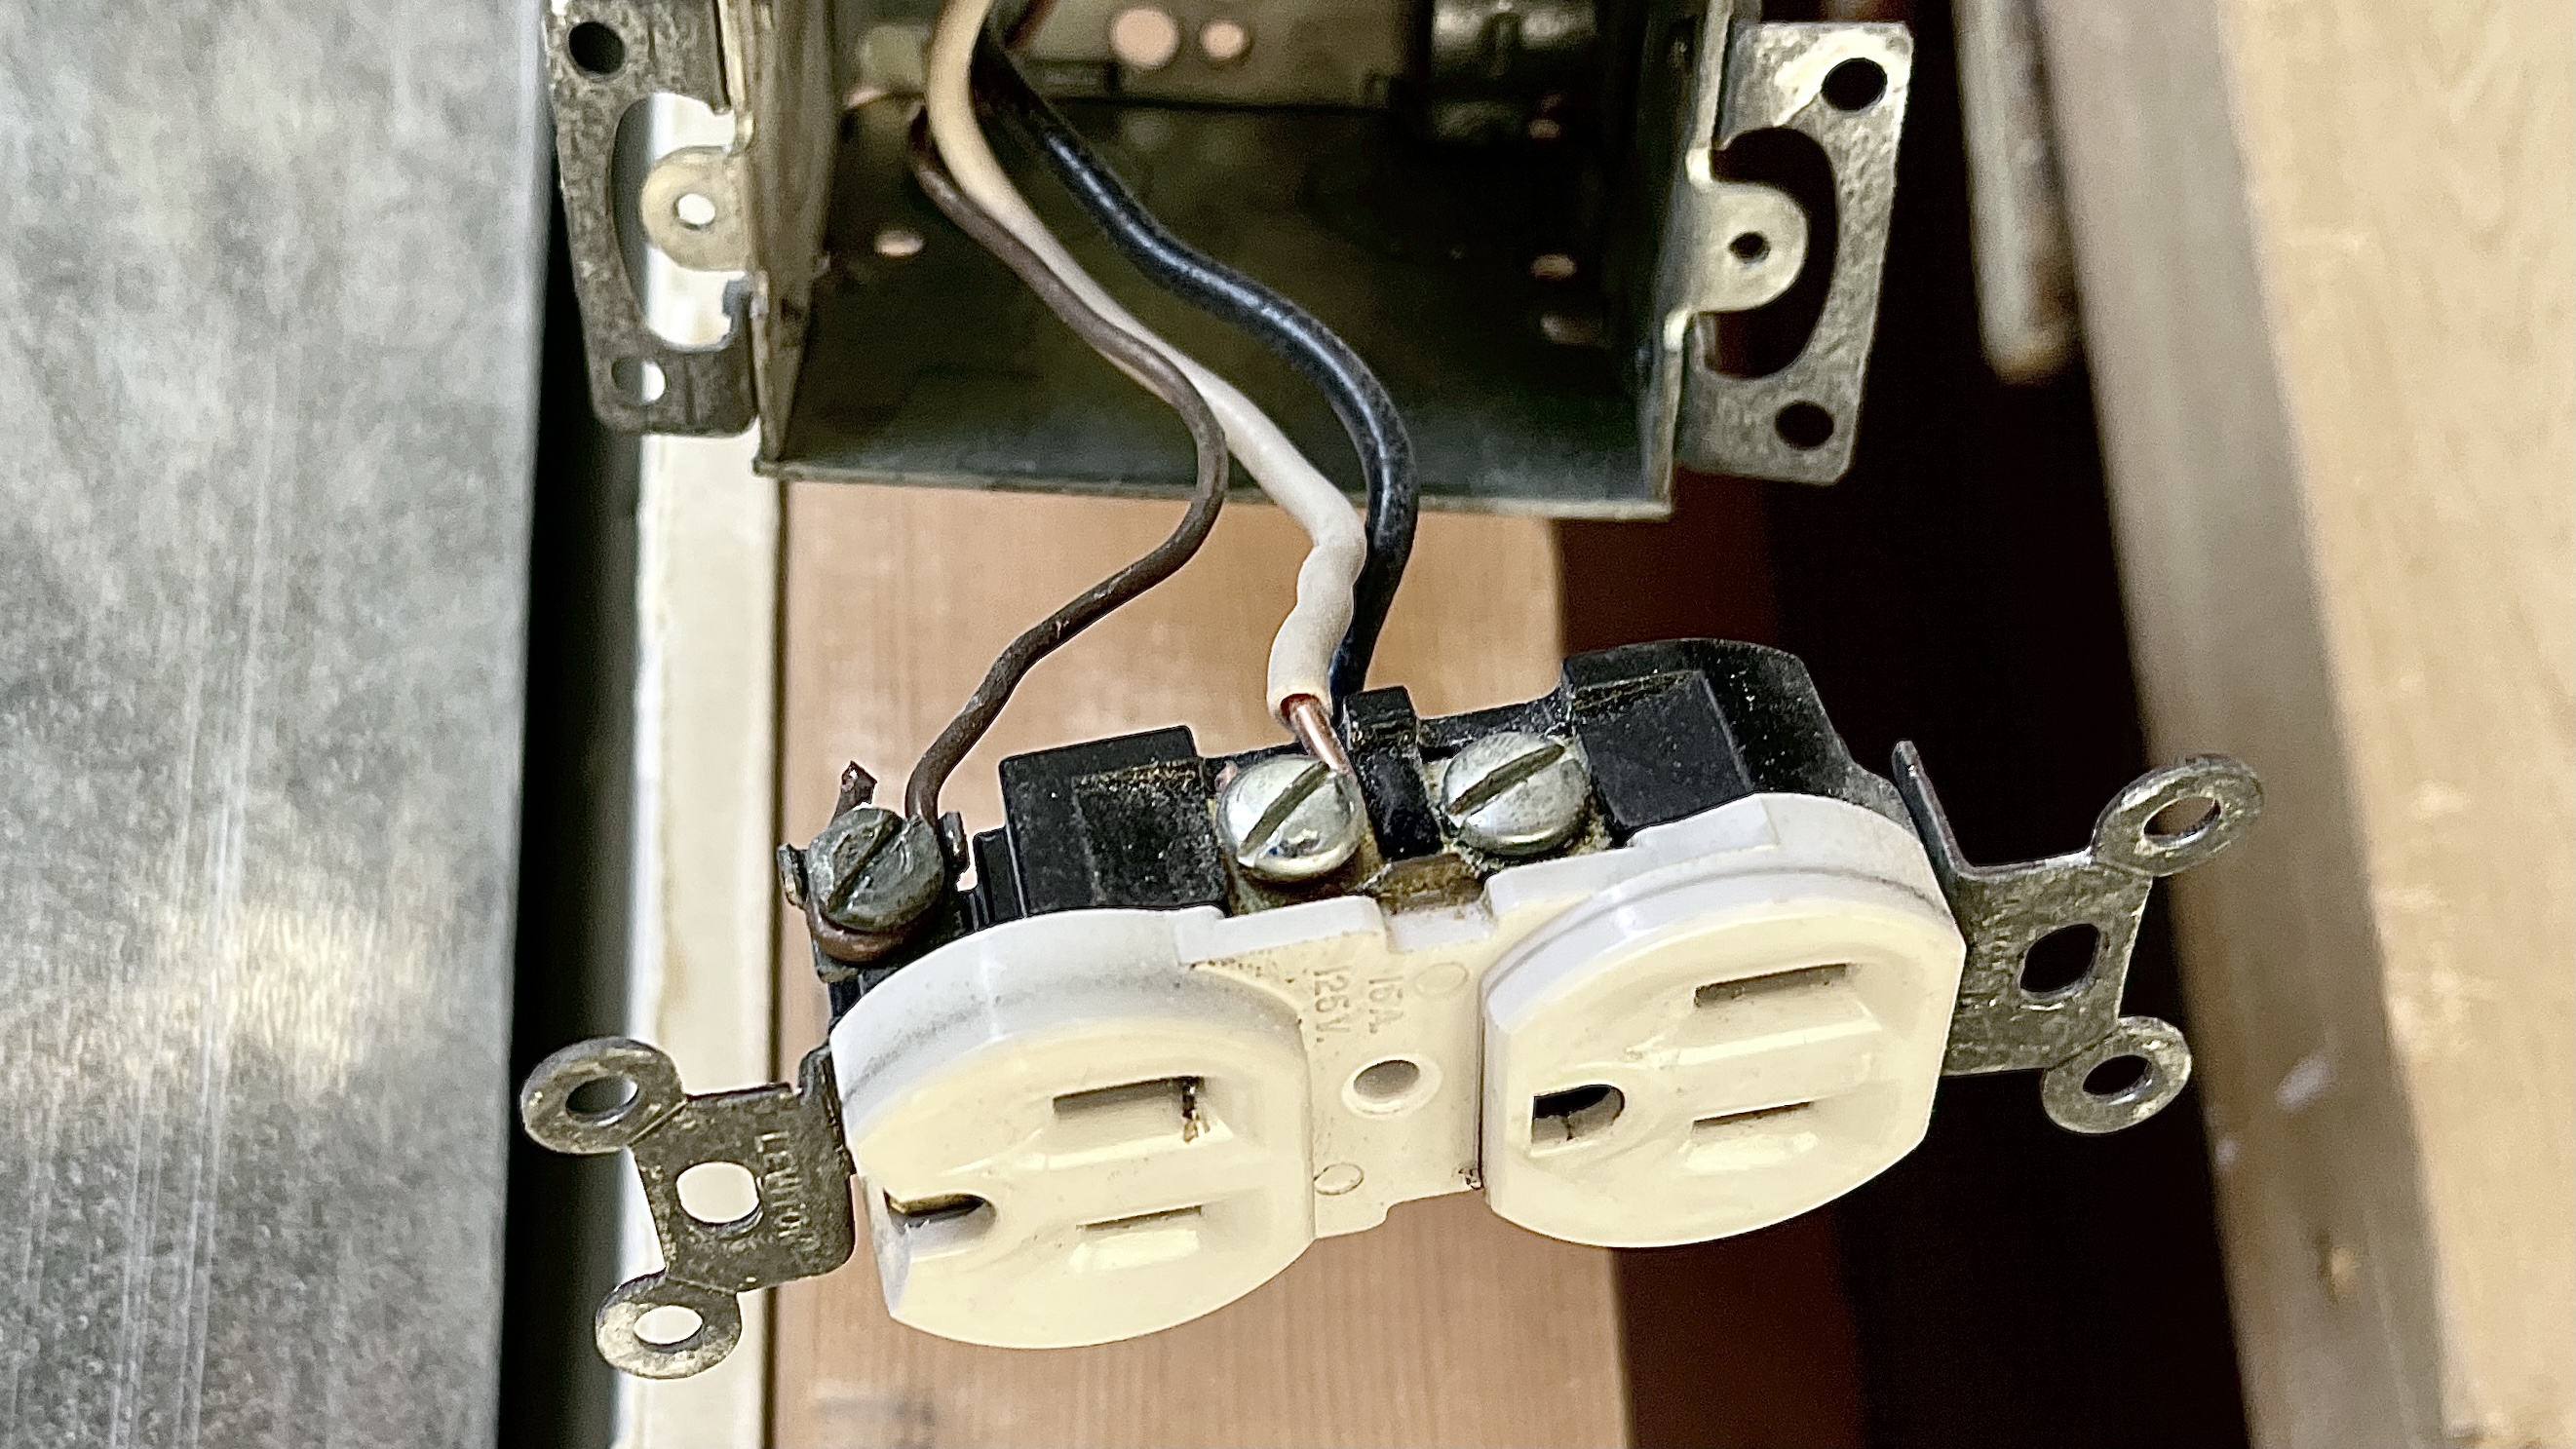 Diy Smart Home What S A Neutral Wire, How To Replace A Light Switch Without Ground Wire